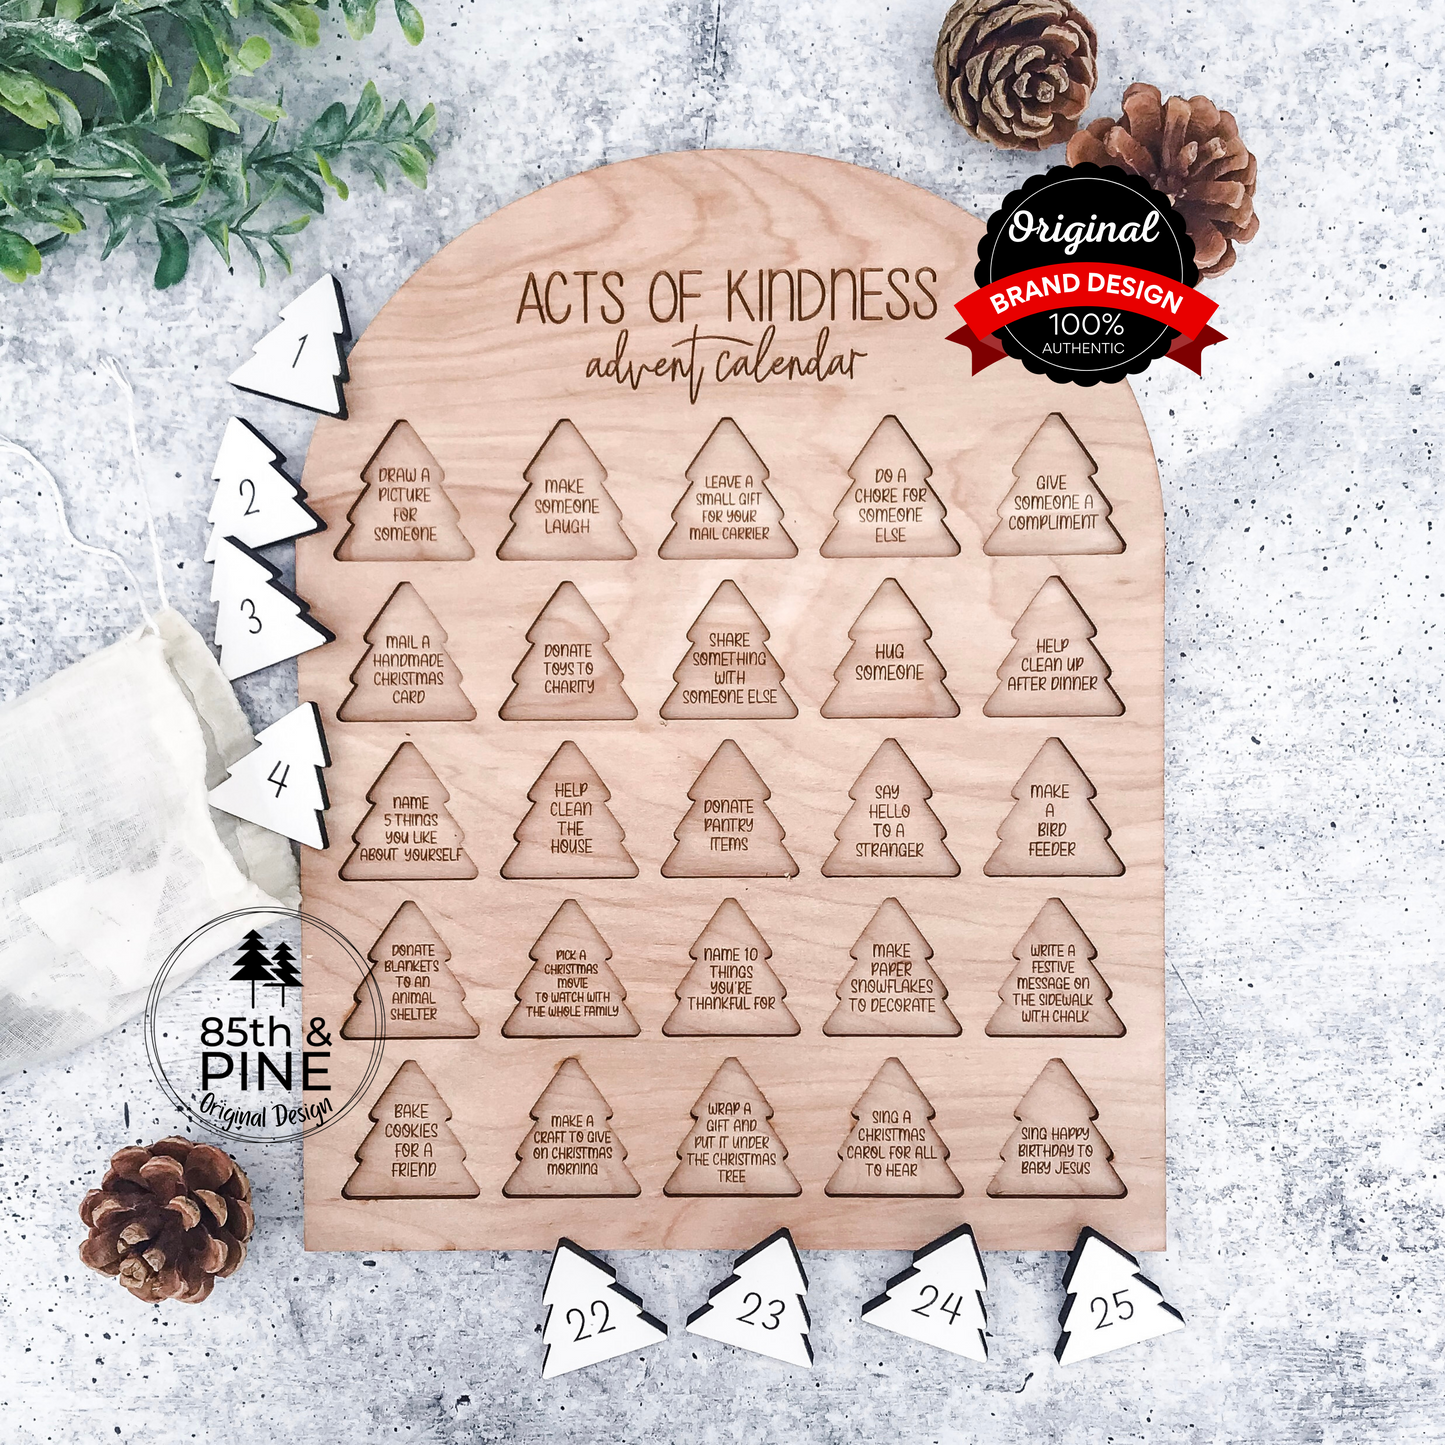 Acts of Kindness Advent Calendar - Kids Activity Calendar - Kids Advent Calendar - Christmas Activities for Kids